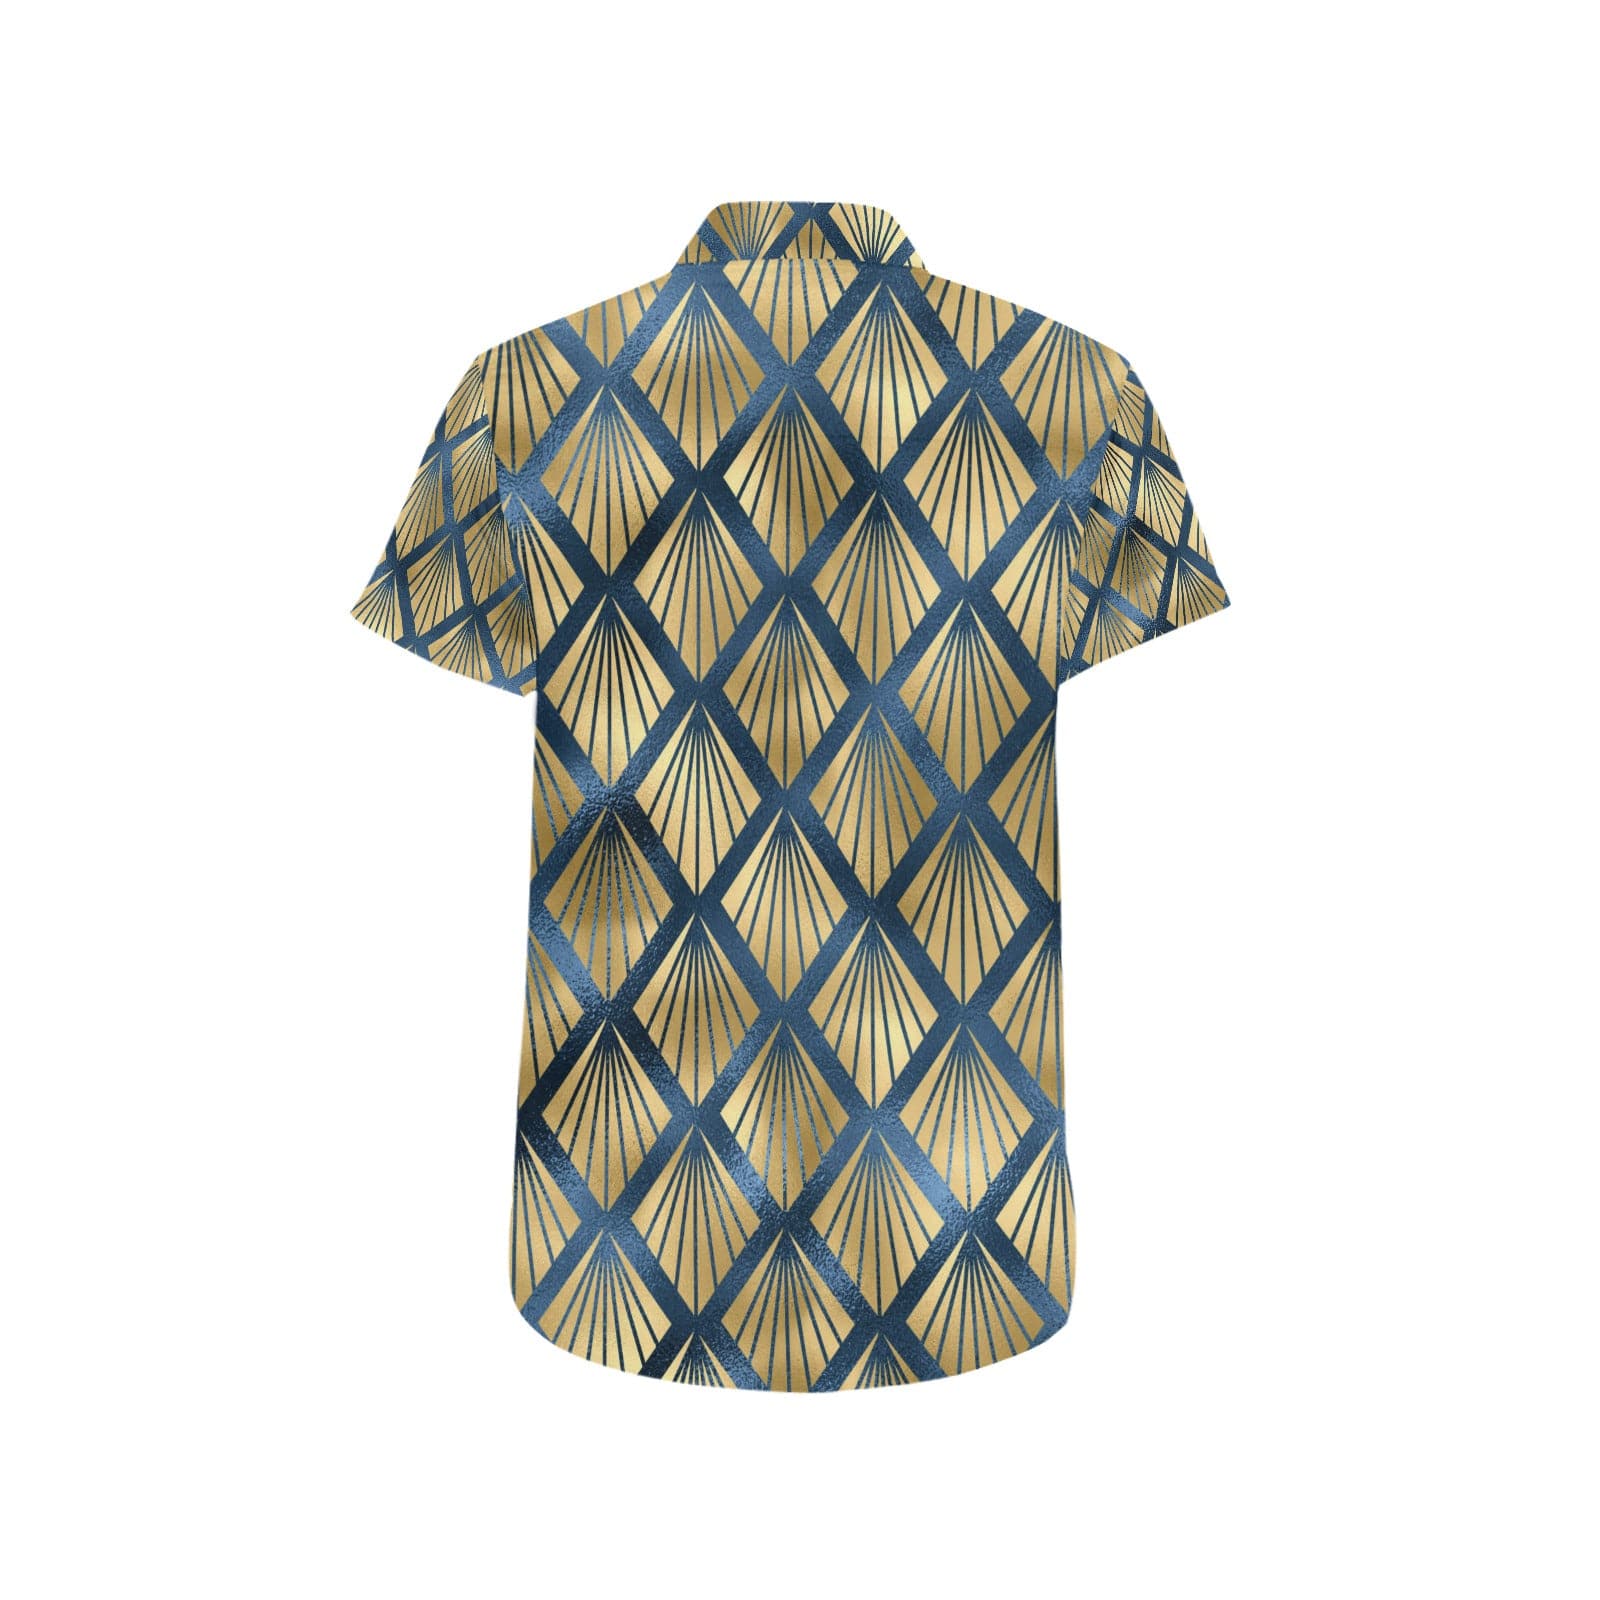 Blue and Gold Diamond Patterned Men's Shirt